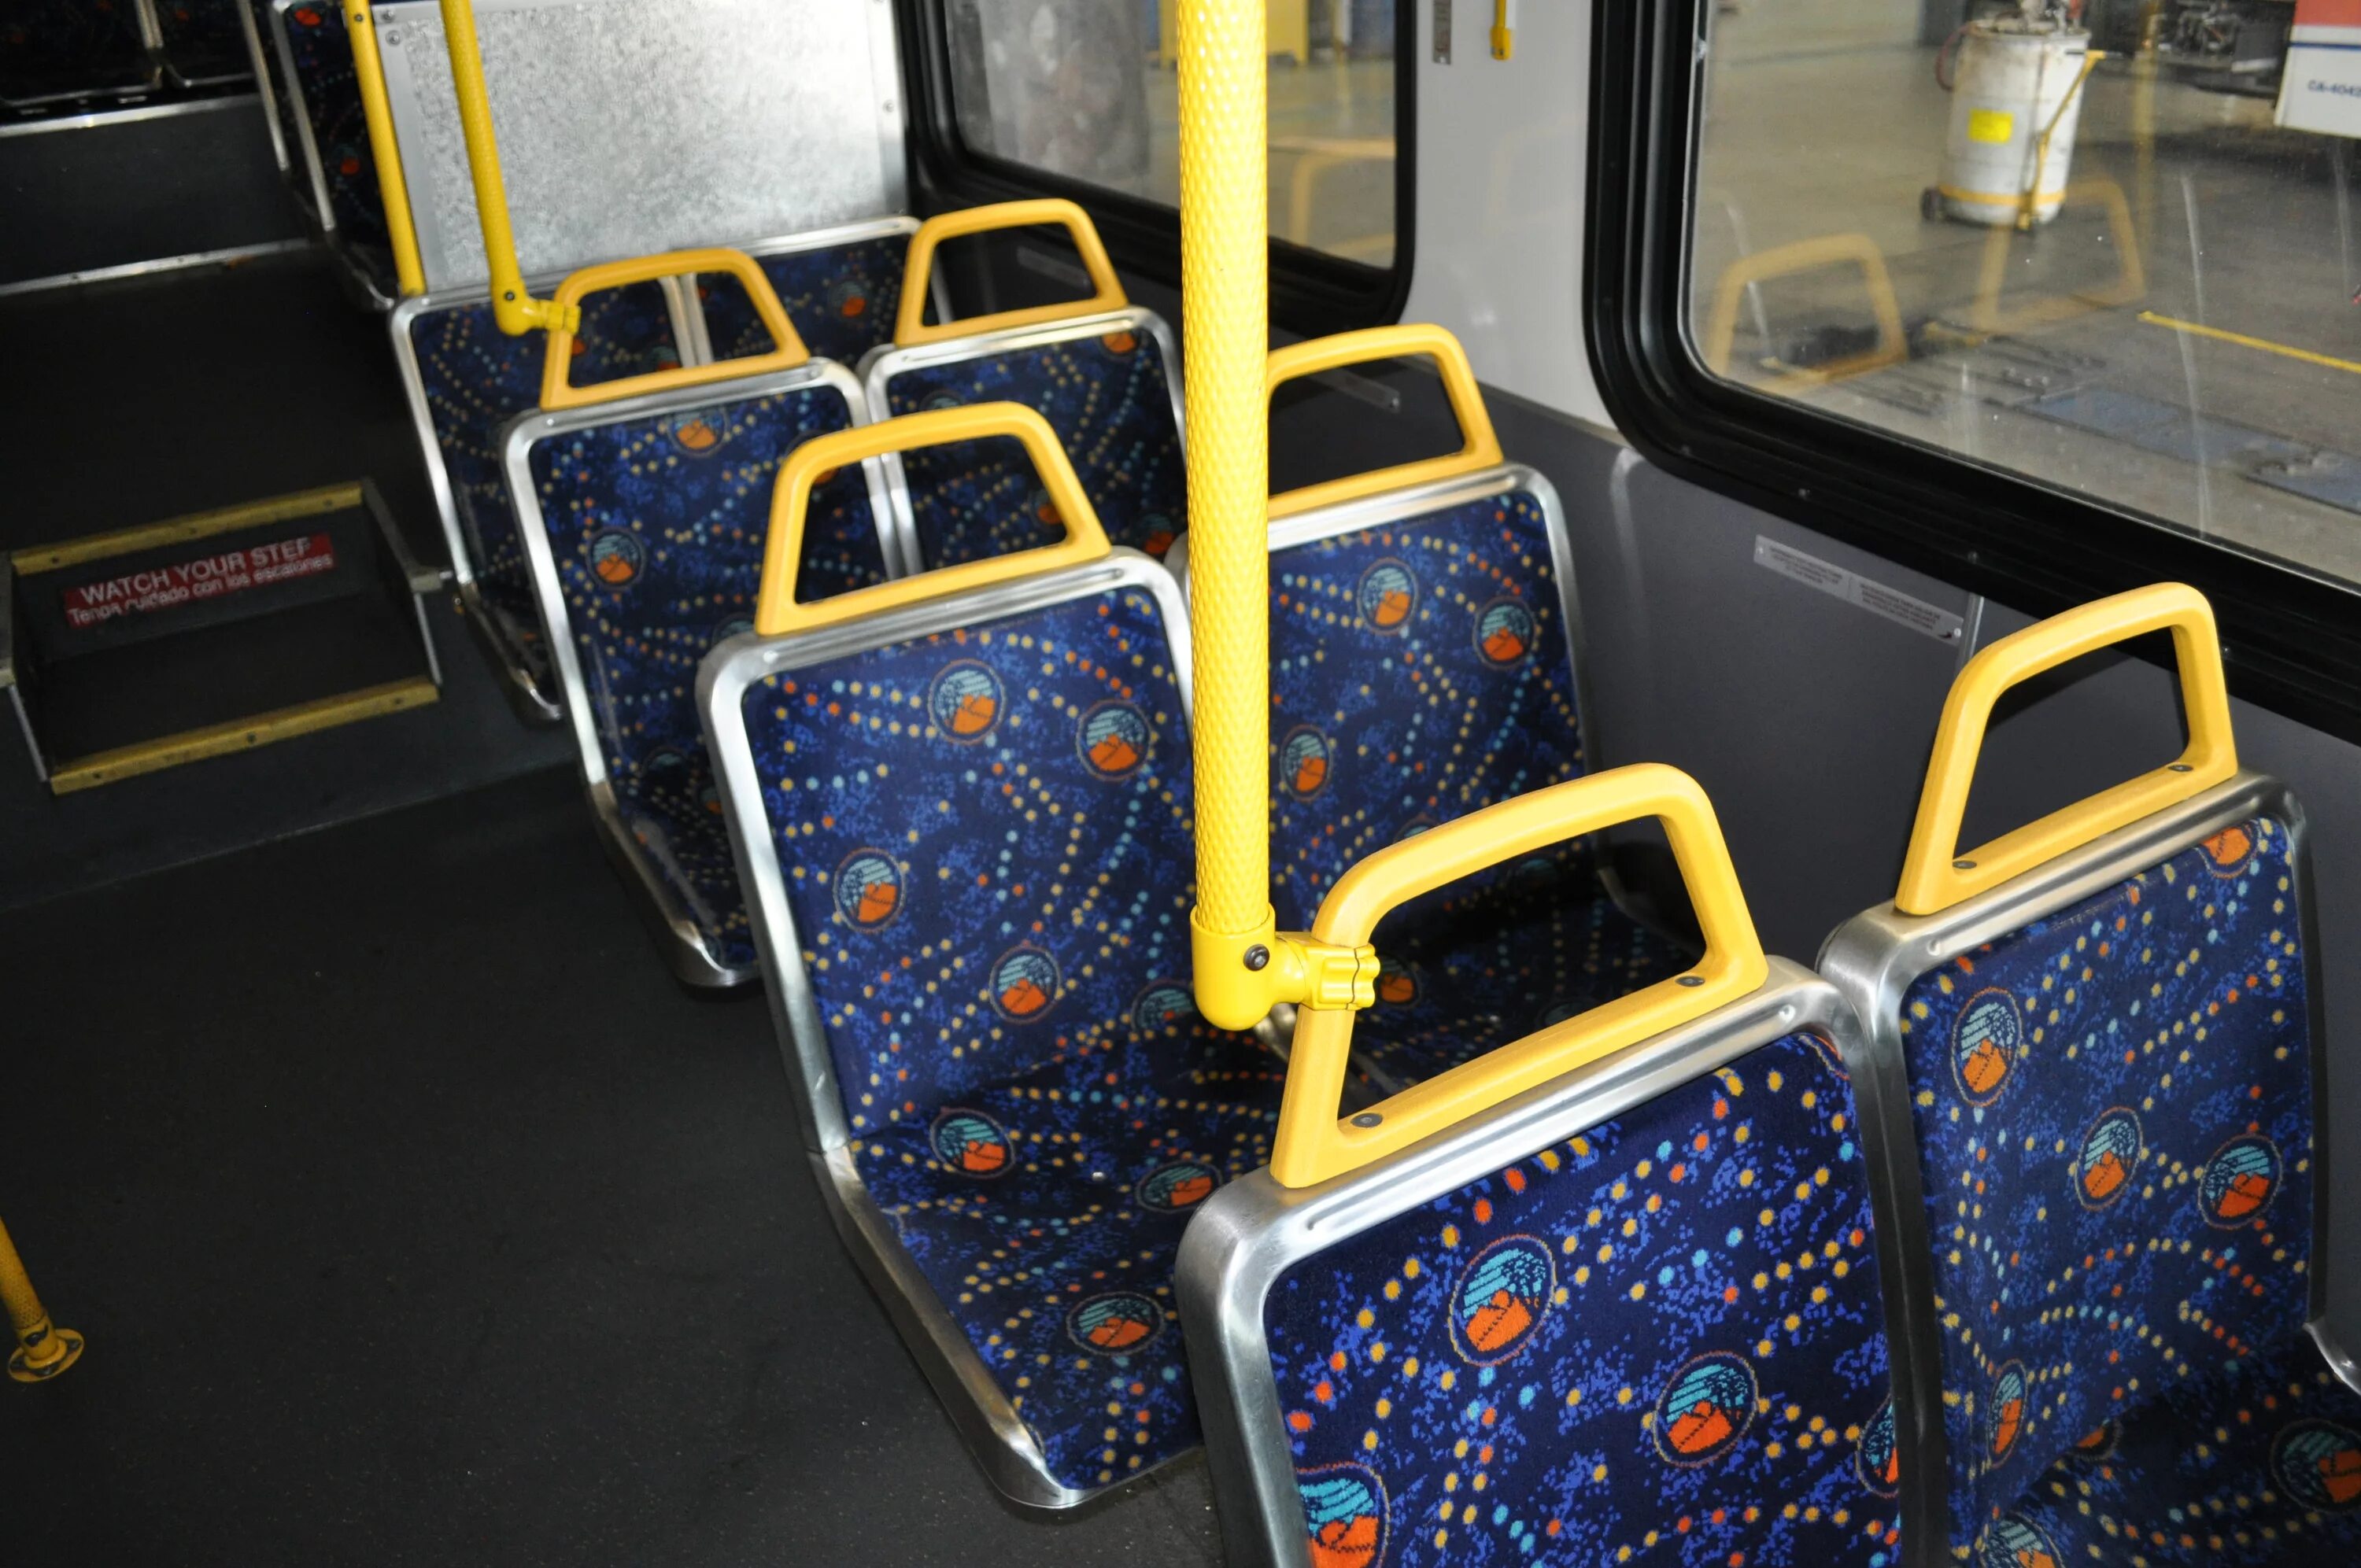 Bus seats. Bus 32 Seats. Seats on the Bus. An empty Seat on the Bus.